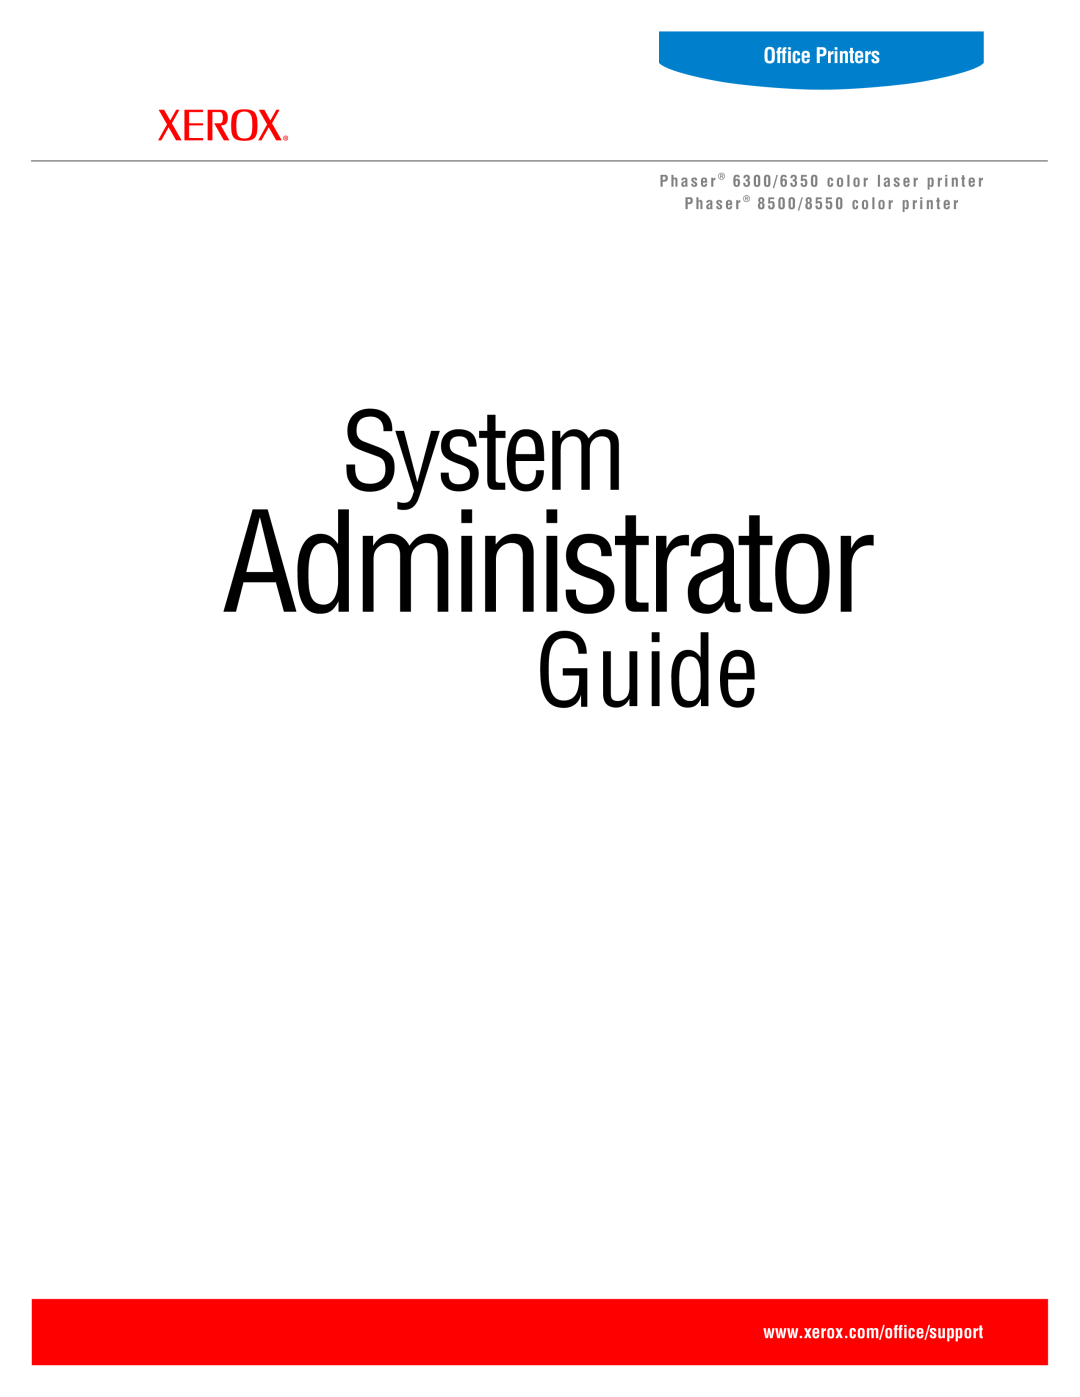 Xerox 6300, 6350, 8500, 8550 manual Administrator, System, Guide, Office Printers 